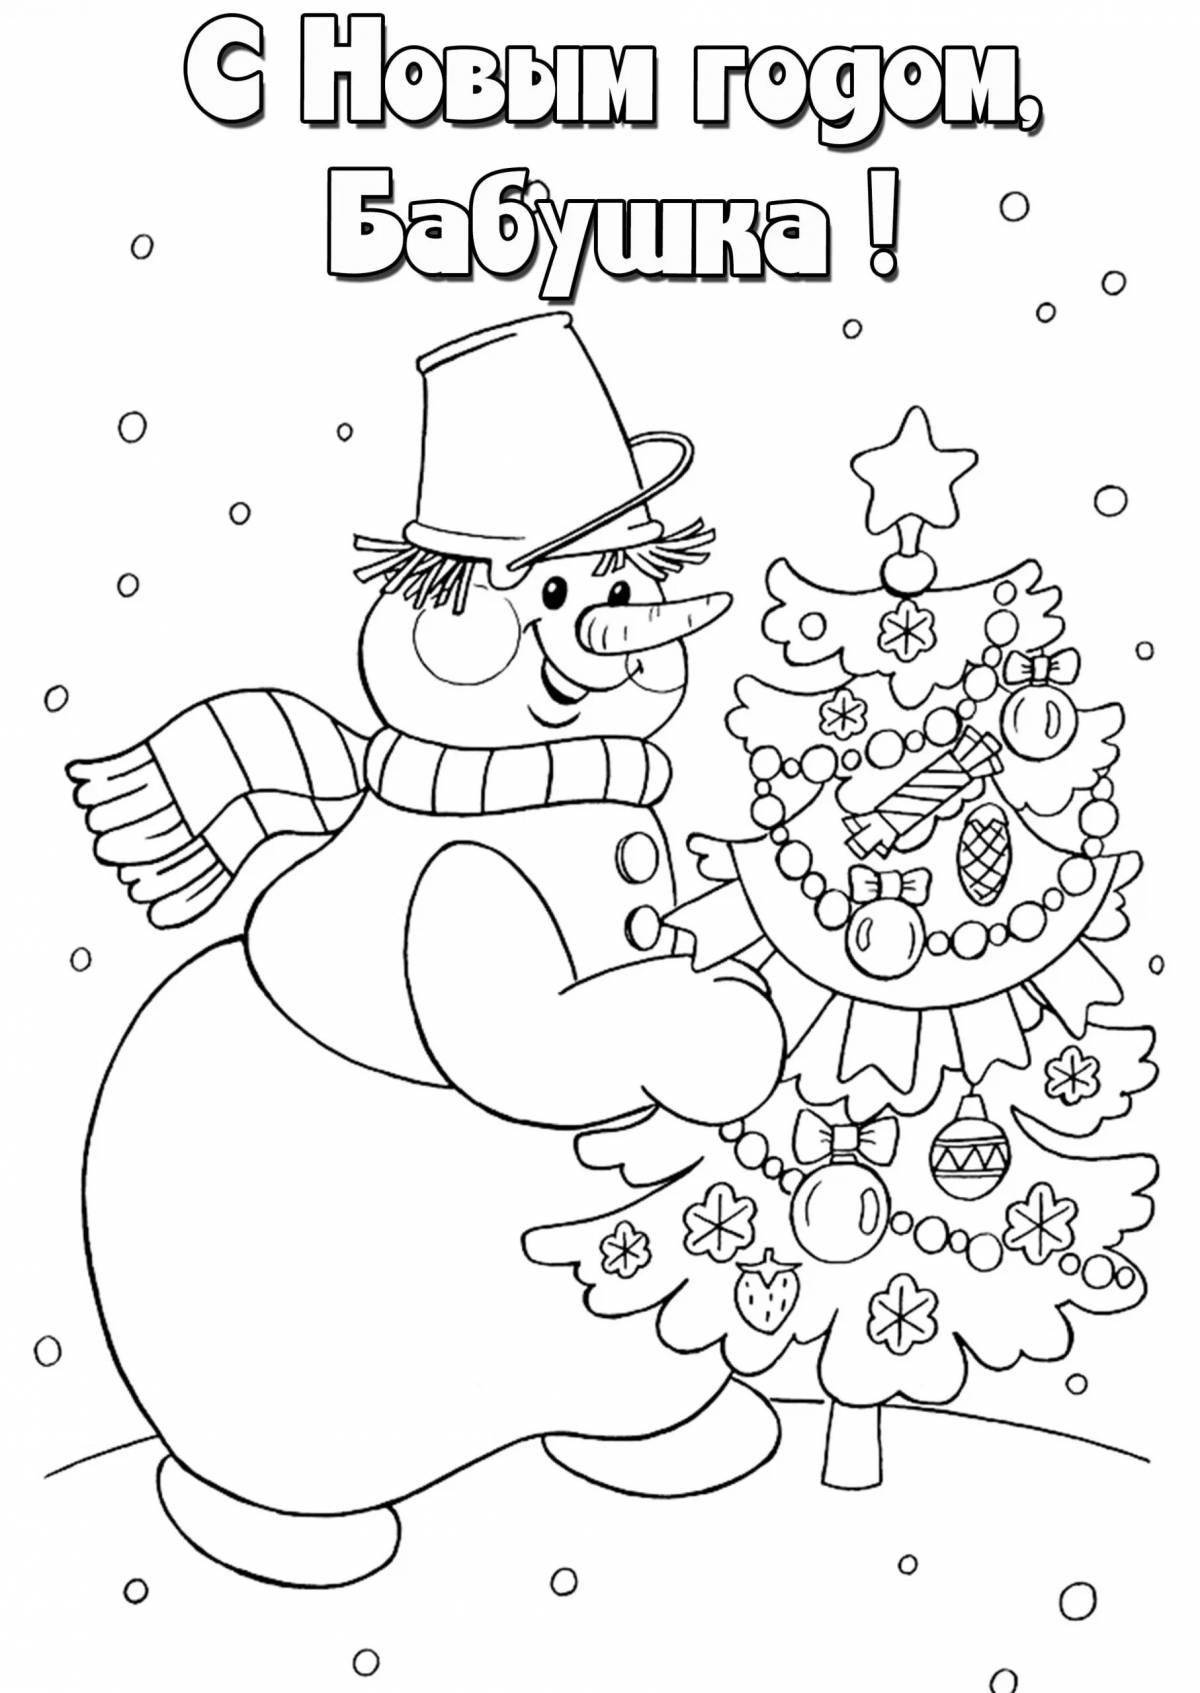 Color-frenzy coloring page с новым годом бабушка